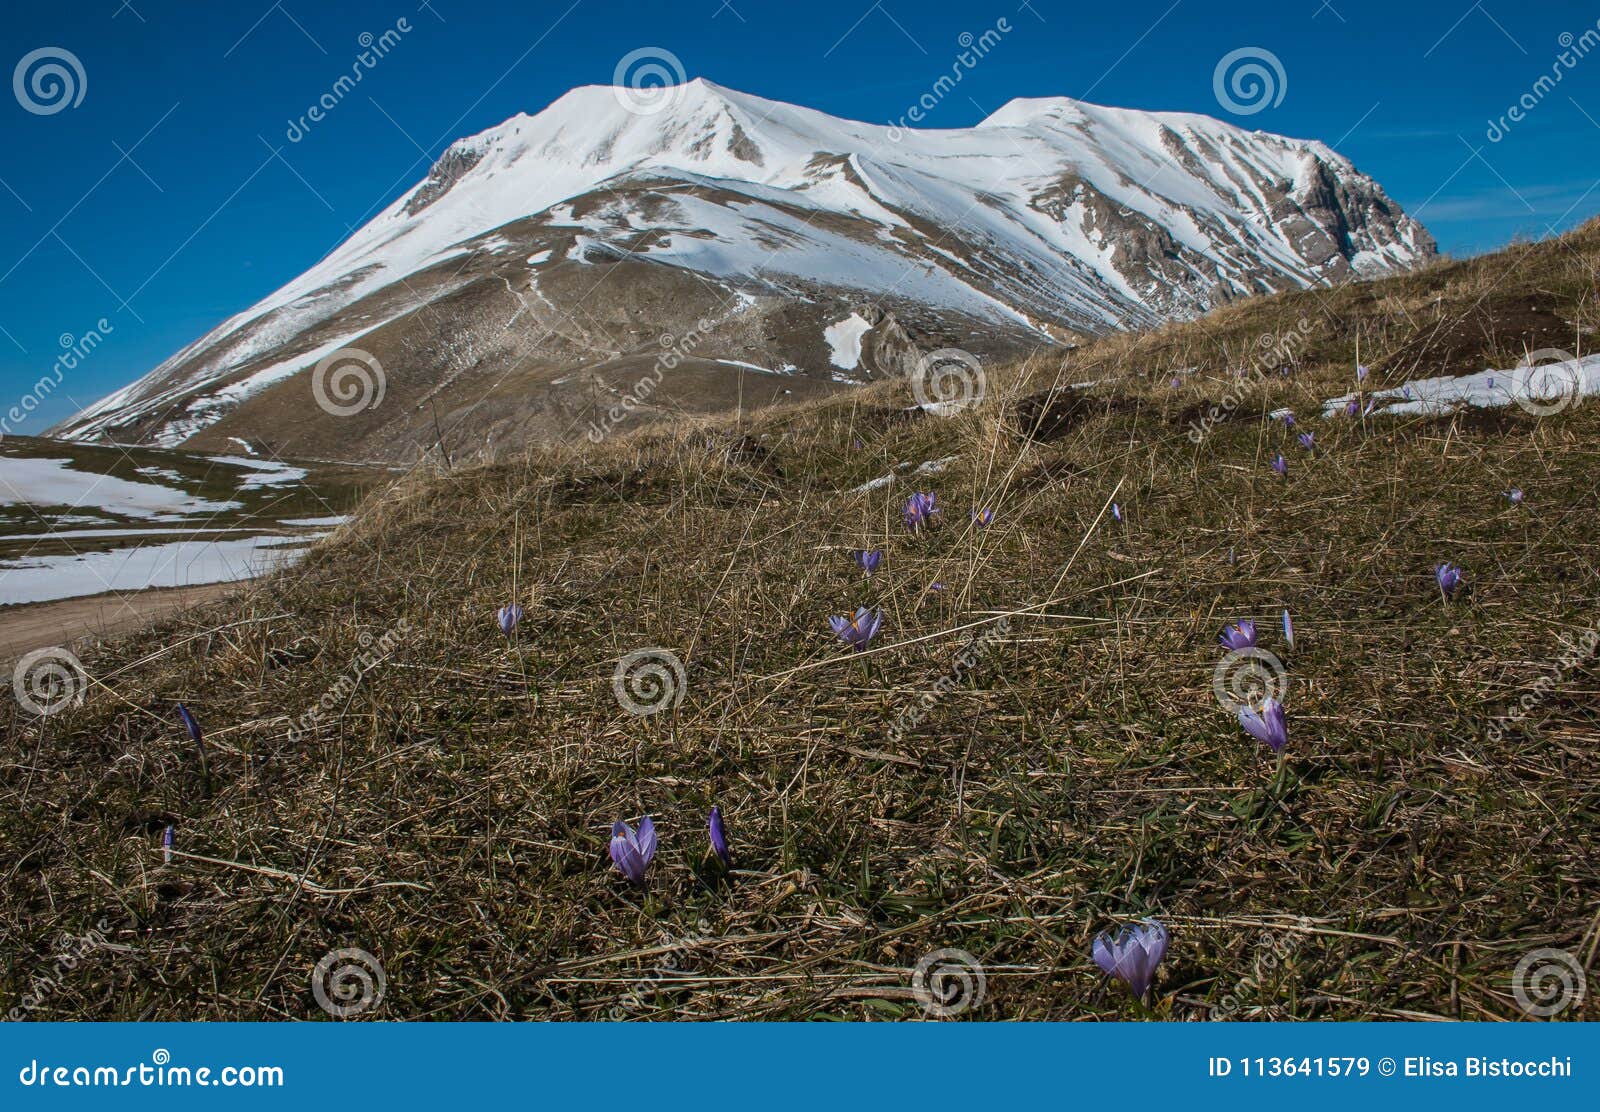 photo of vettore mountain with snow and crocus flowers